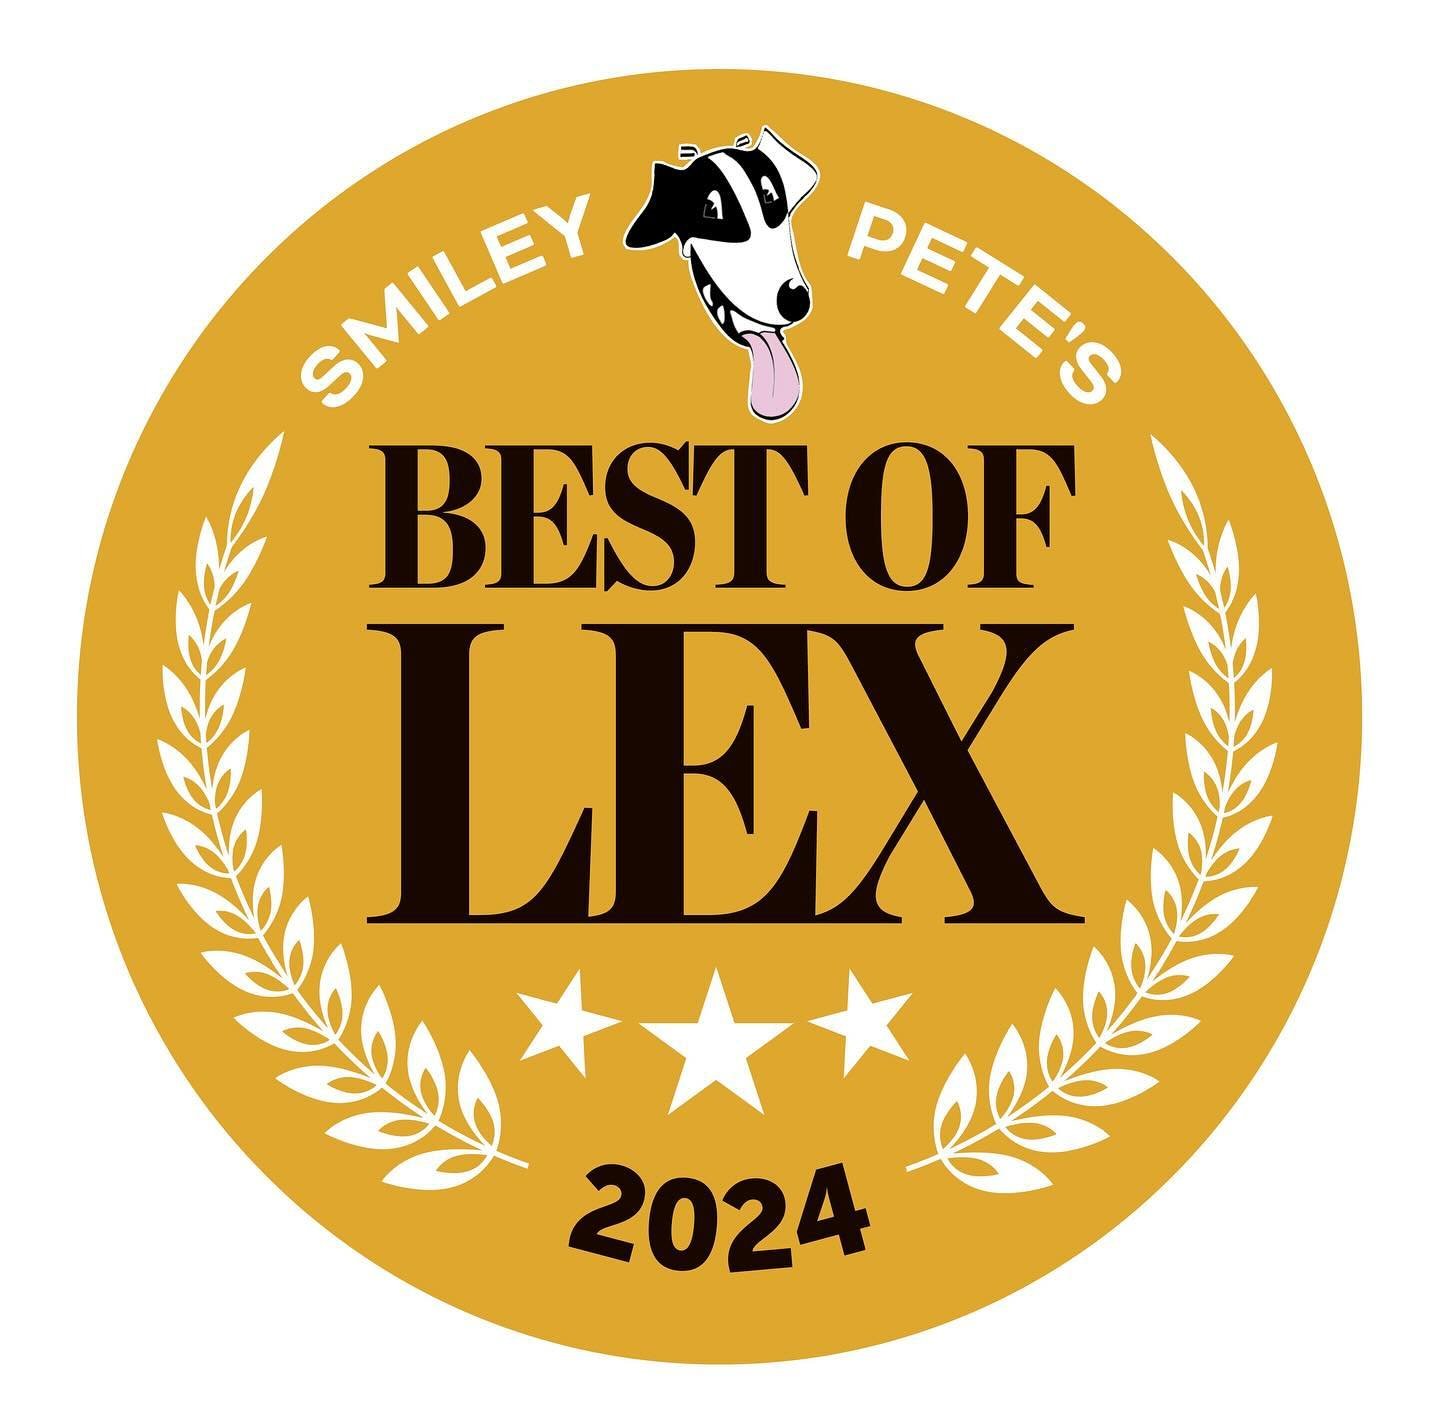 Thank you for voting us BEST OF LEX!

We&rsquo;re so thrilled to be the 2024 Best Theatre Company in Smiley Pete&rsquo;s Best of Lex Campaign!

From over 260,000 votes, Smiley Pete Publishing (The Chevy Chaser &amp; Southsider Magazines) readers have